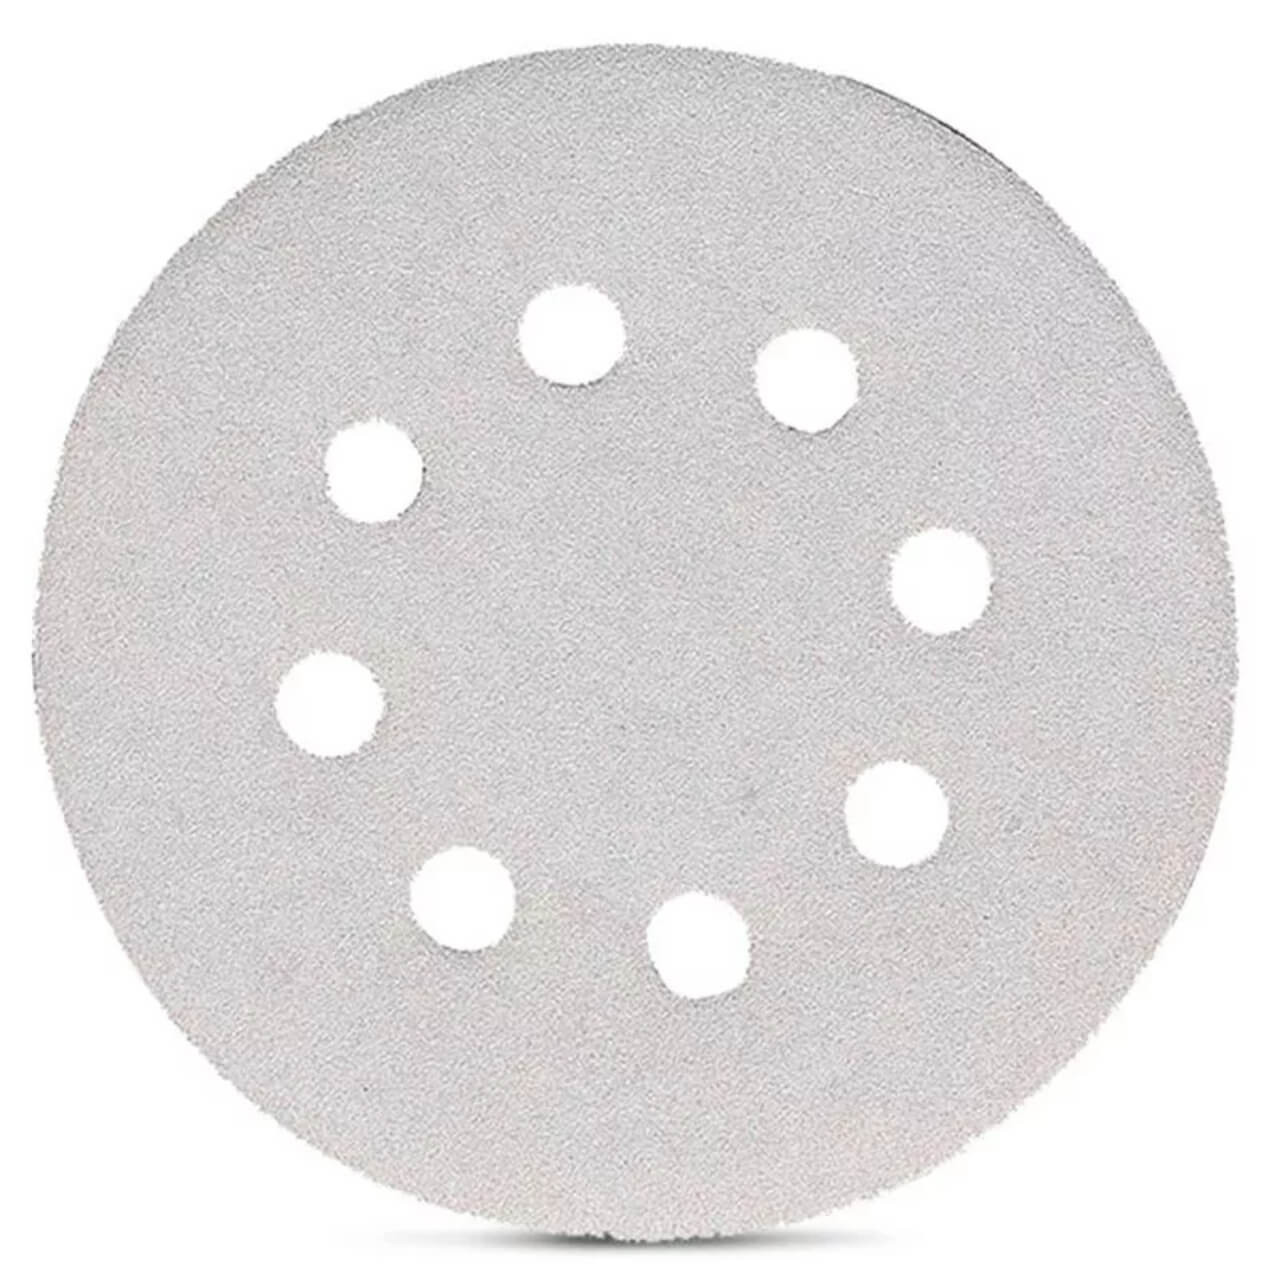 Makita Sanding Disc White 125mm / 240# Punched - (10pk)